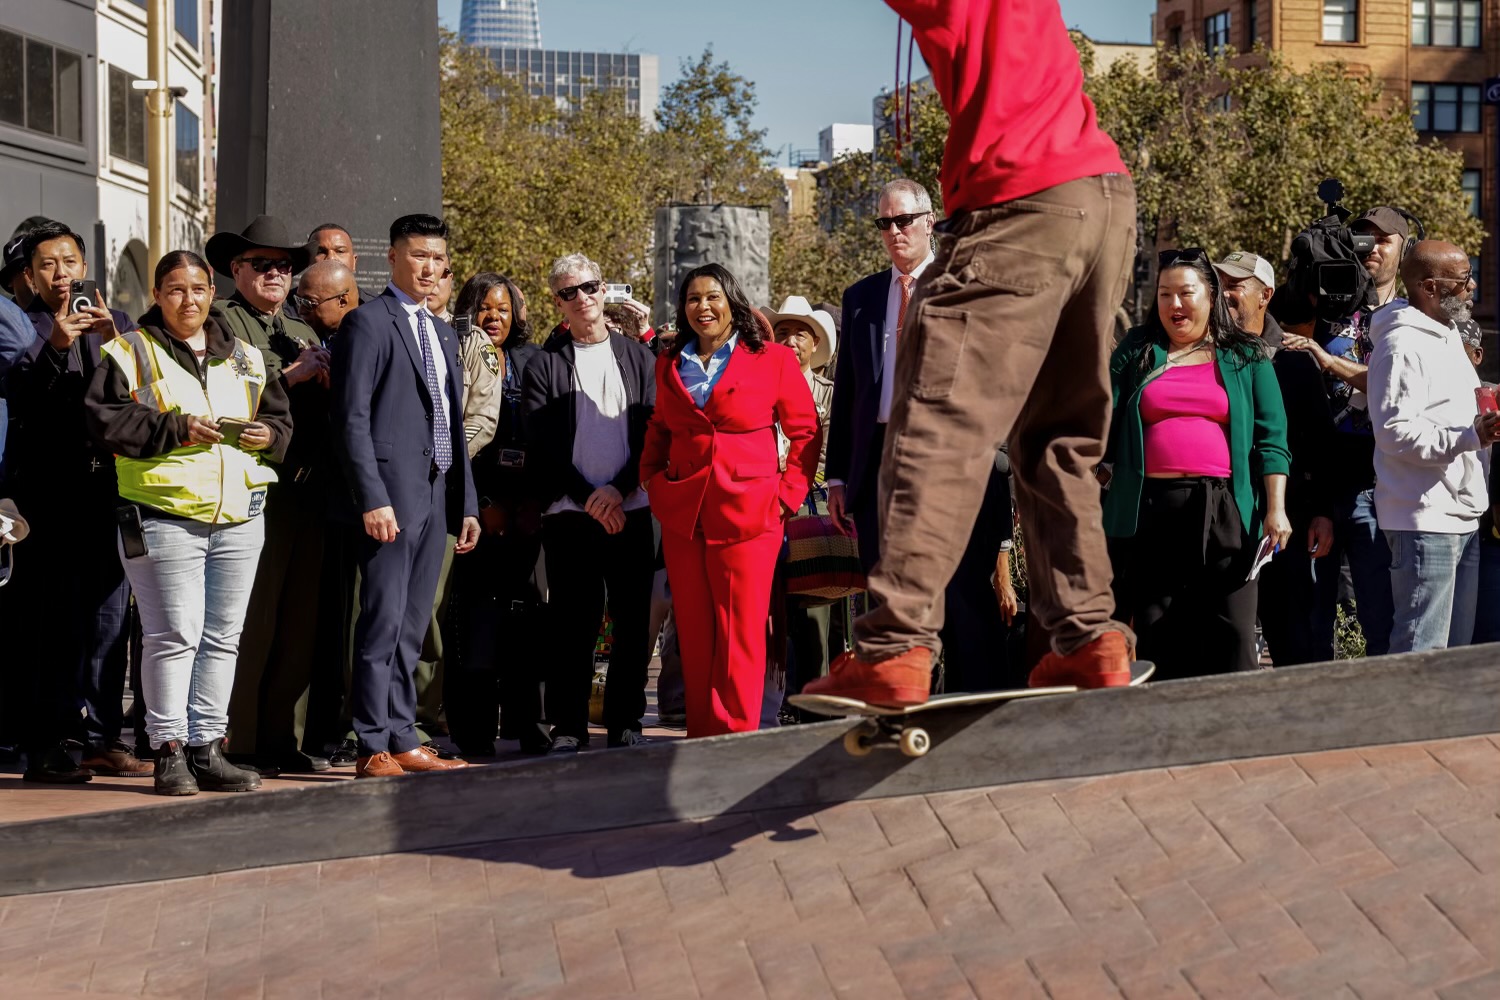 A large group of people including San Francisco Mayor London Breed, watches a skateboarder do a trick on a rail in a newly unveiled skate park in U.N. Plaza on a sunny day in downtown San Francisco.